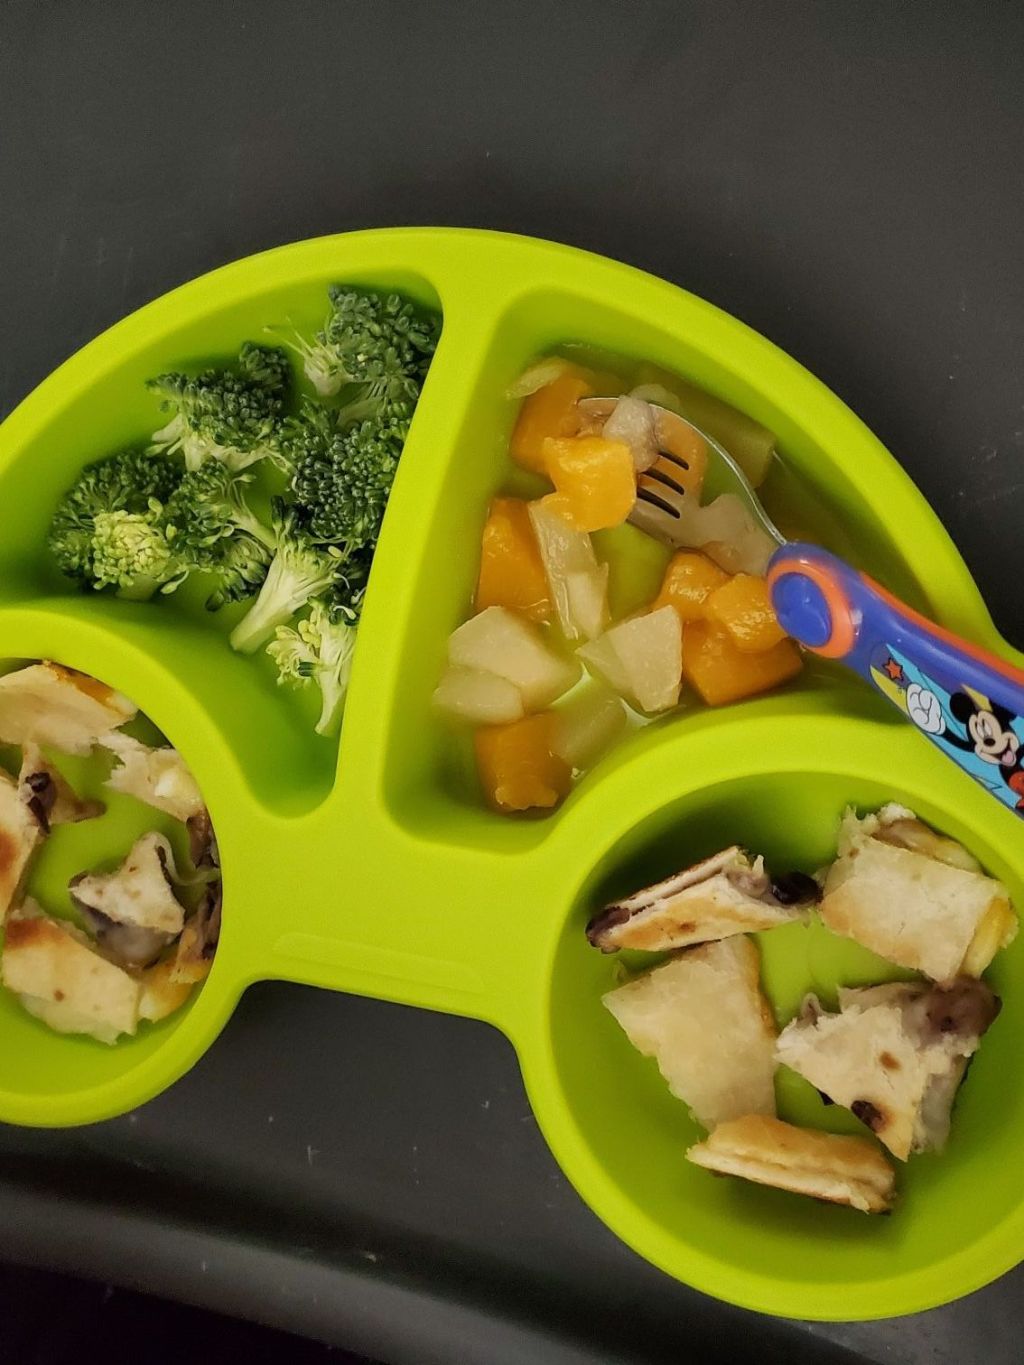 Lunch for the boys: Cheese & Bean Quesadilla, Broccoli, and Mixed Fruit